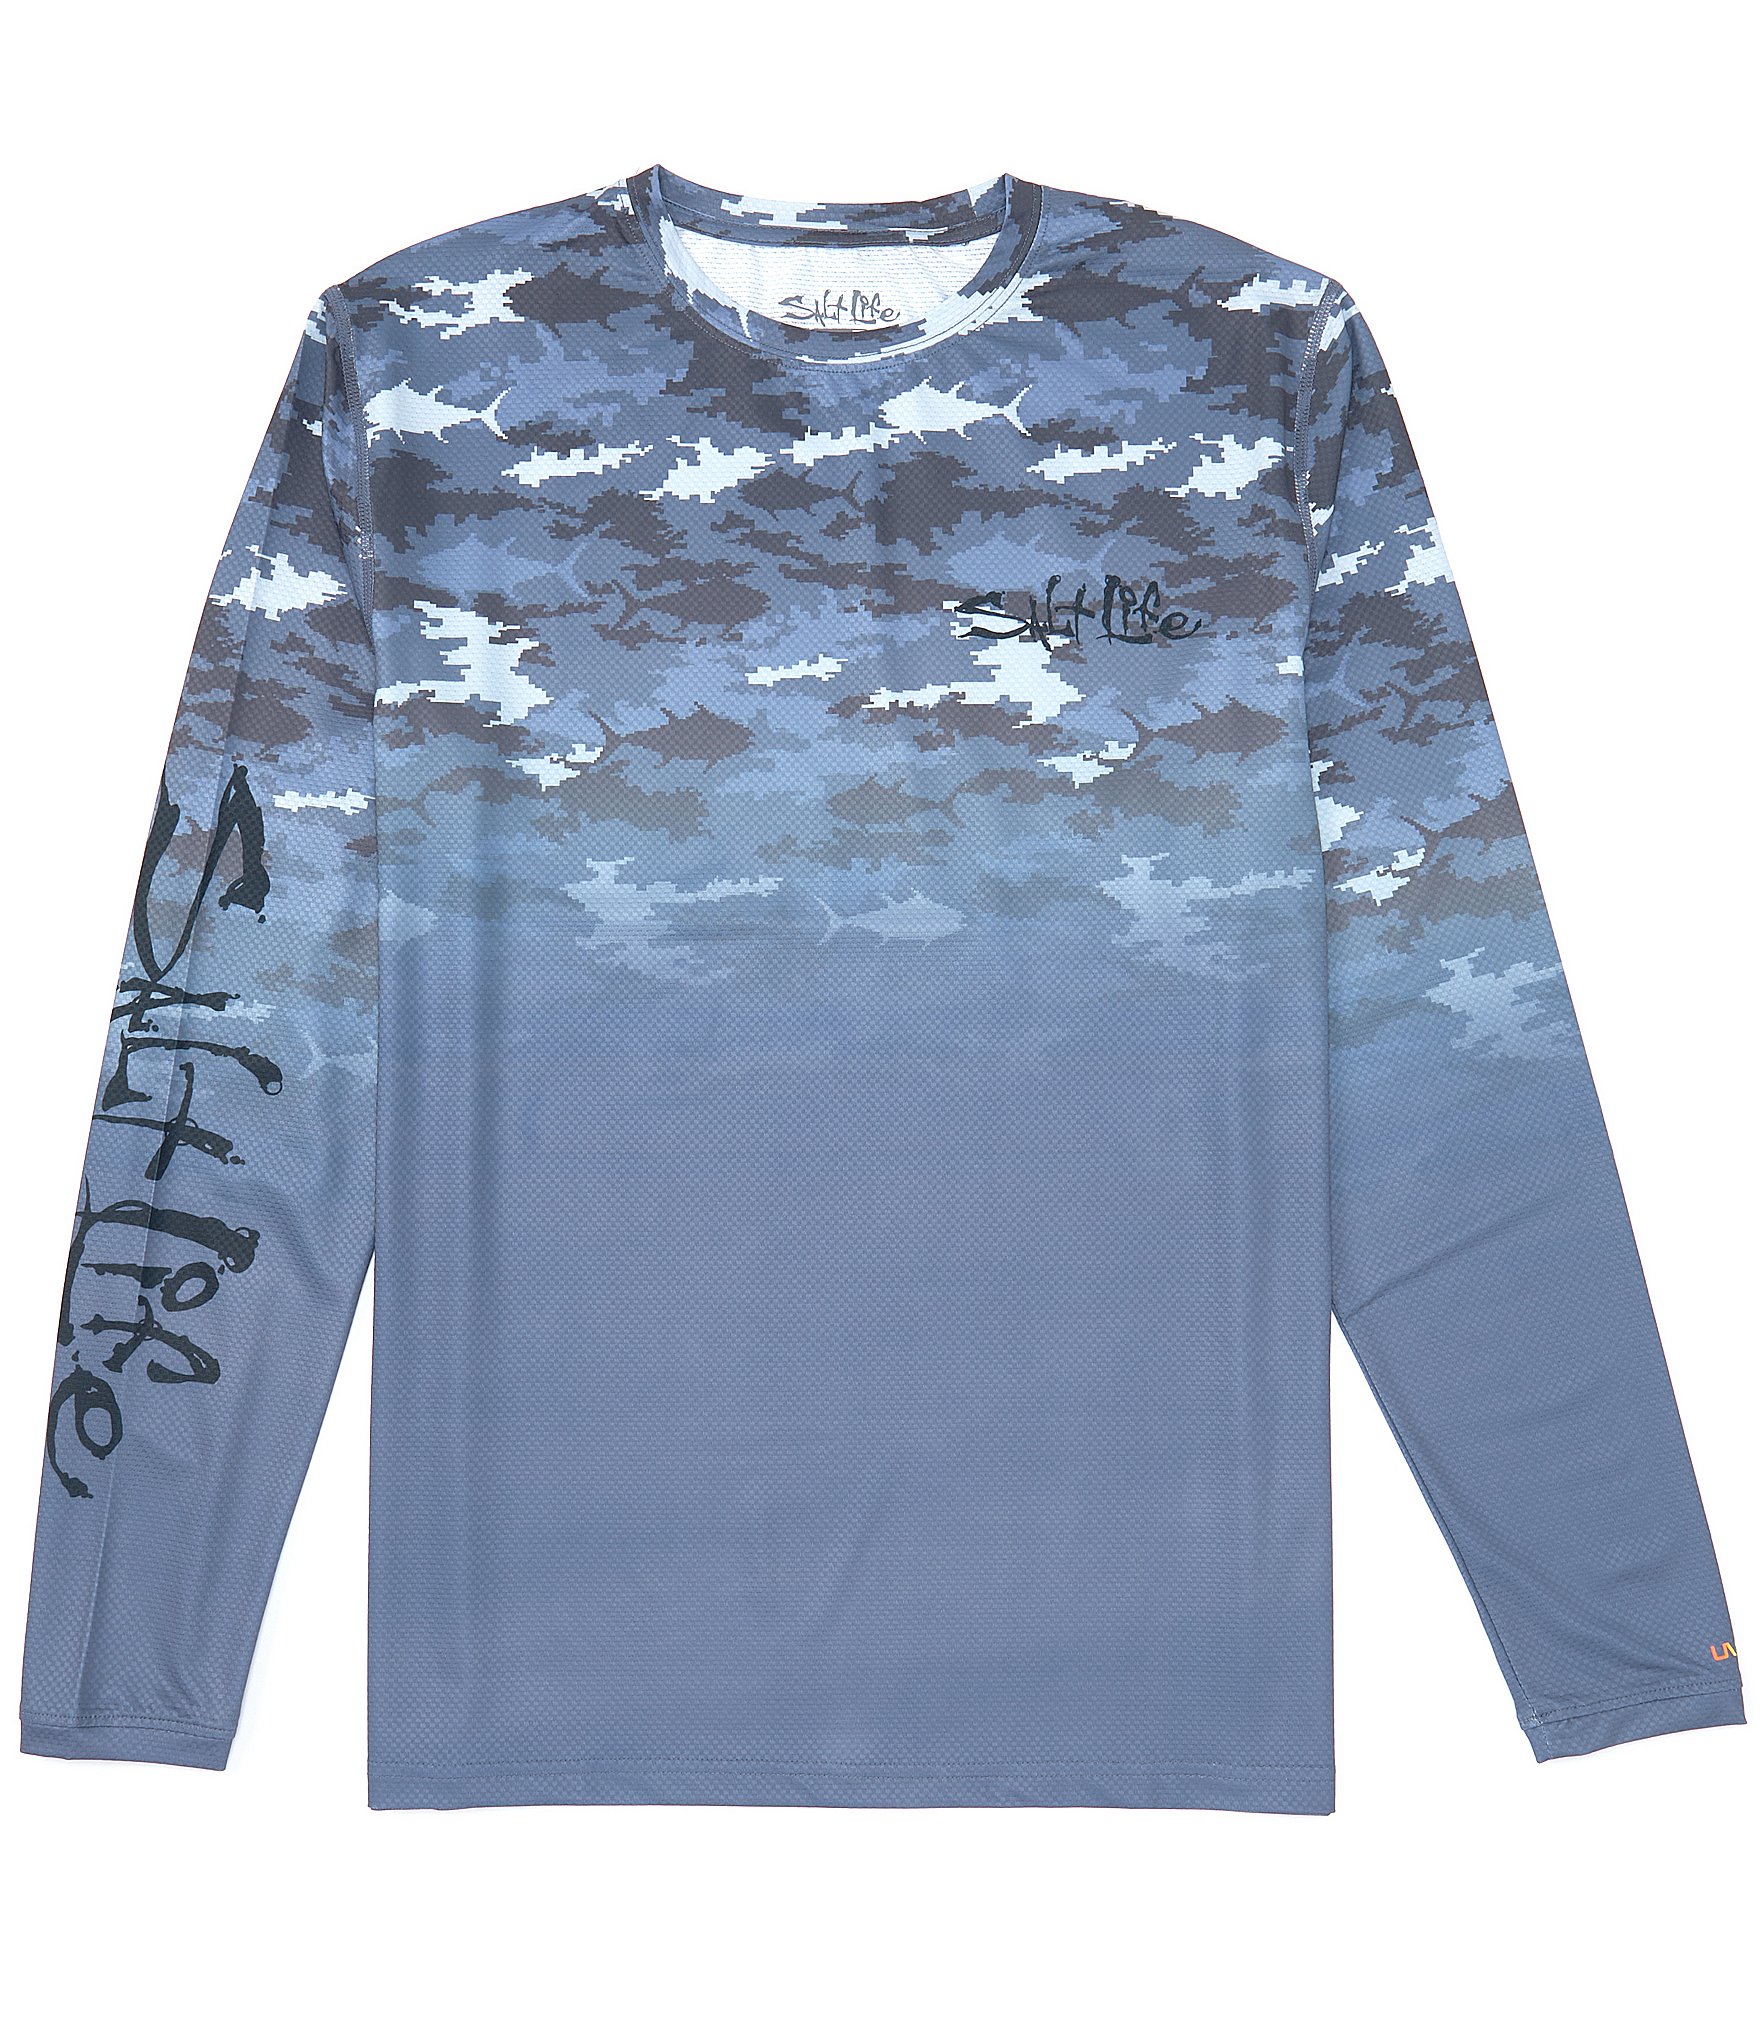 XPEL® Tec Long Sleeve Top in Pewter Camo - Gill Fishing